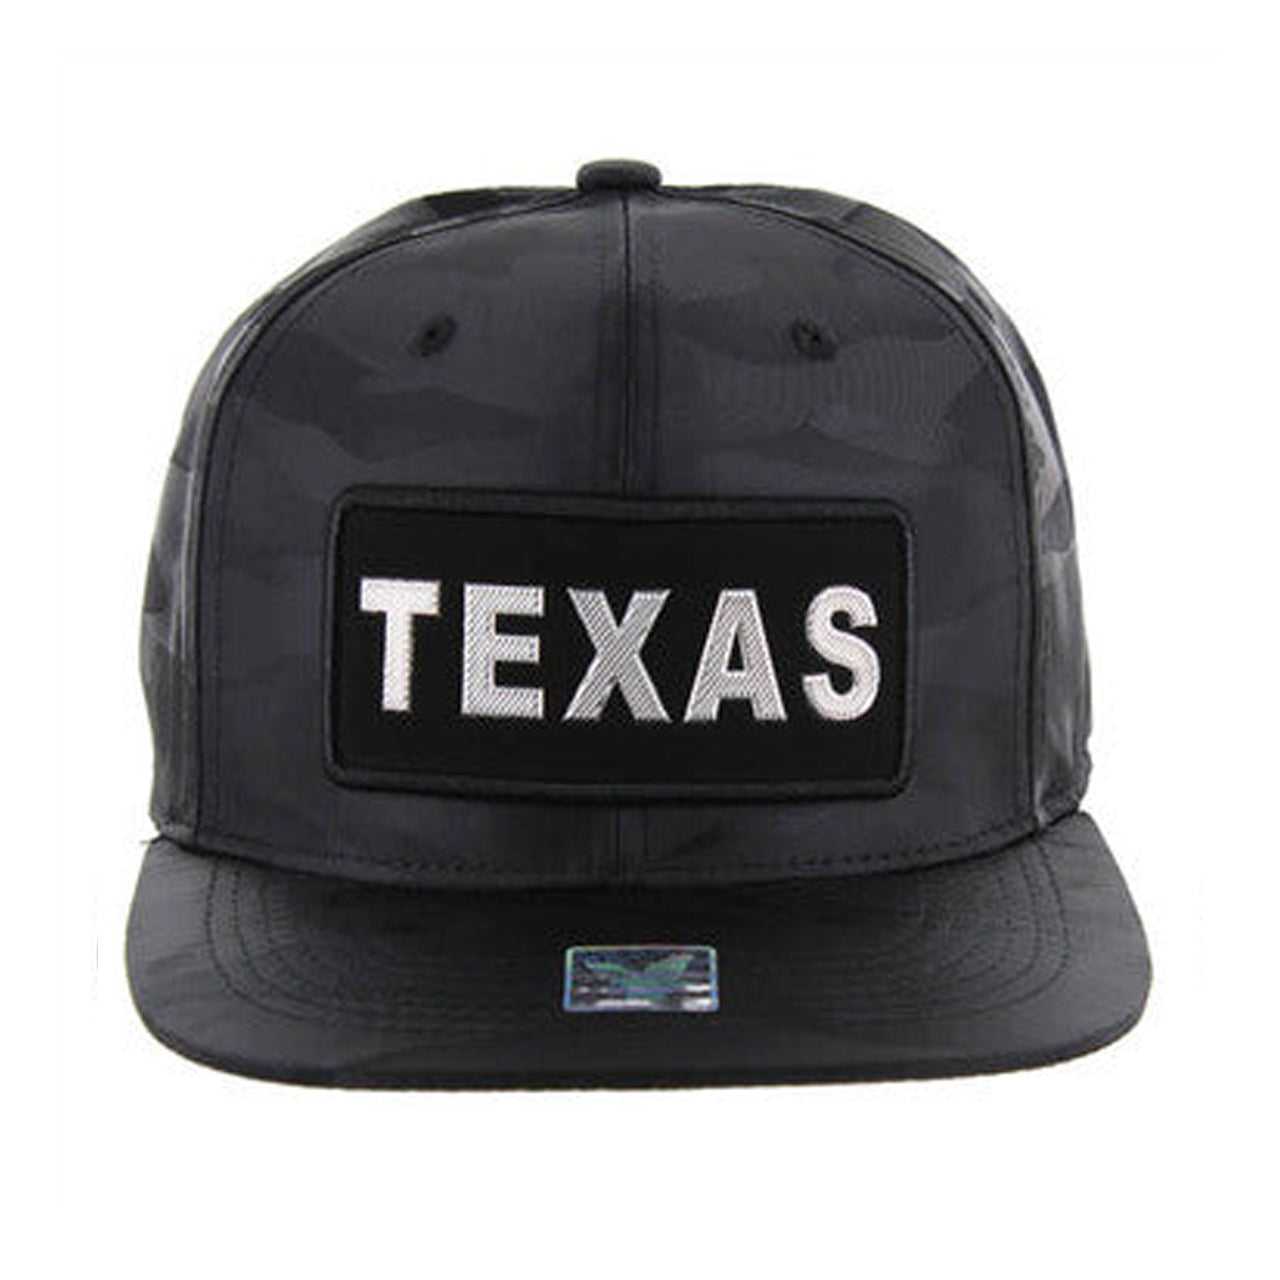 SM250 Texas Snapback Hat - Solid Black Camo - Silver Metal (Pack of 12)